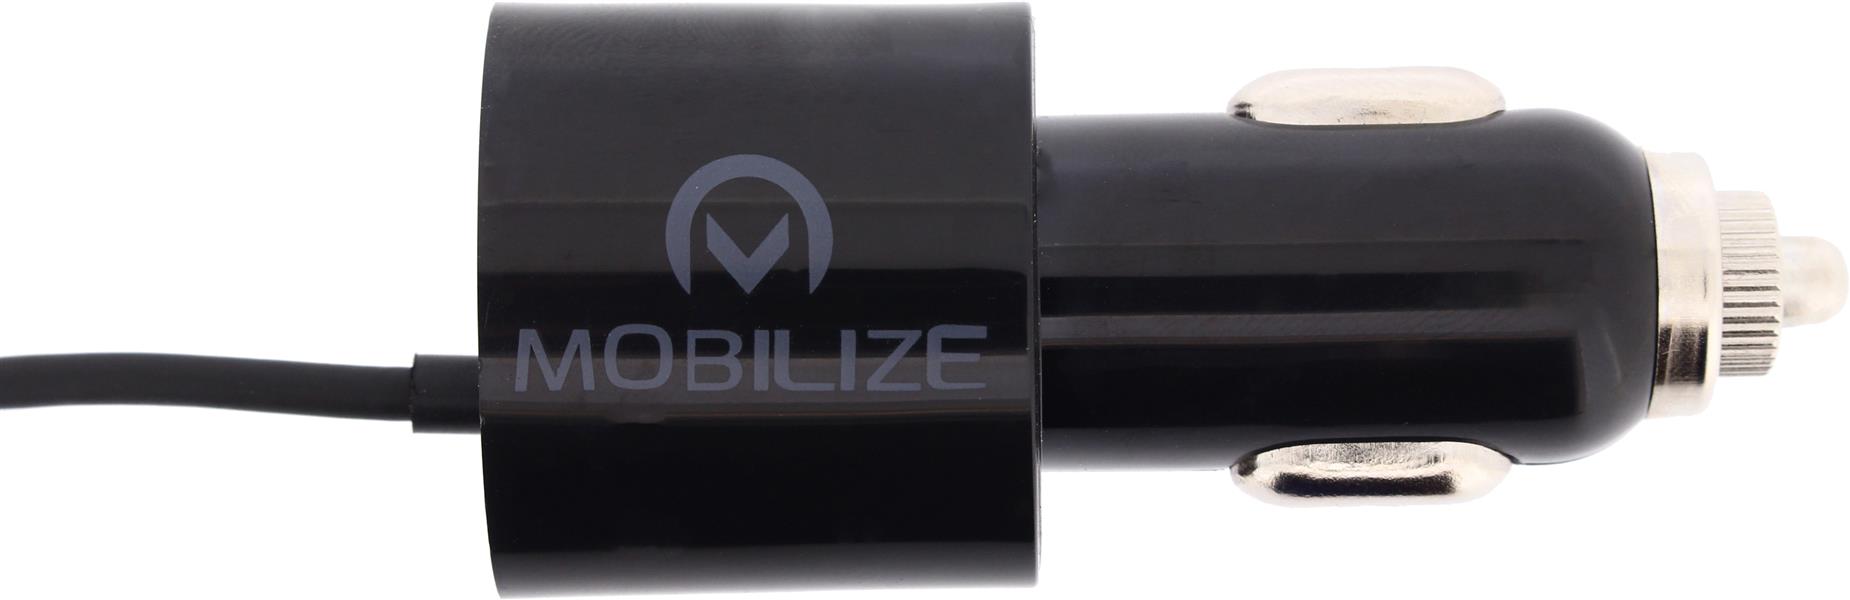 Mobilize Car Charger Micro USB USB 4 2A 20W Black